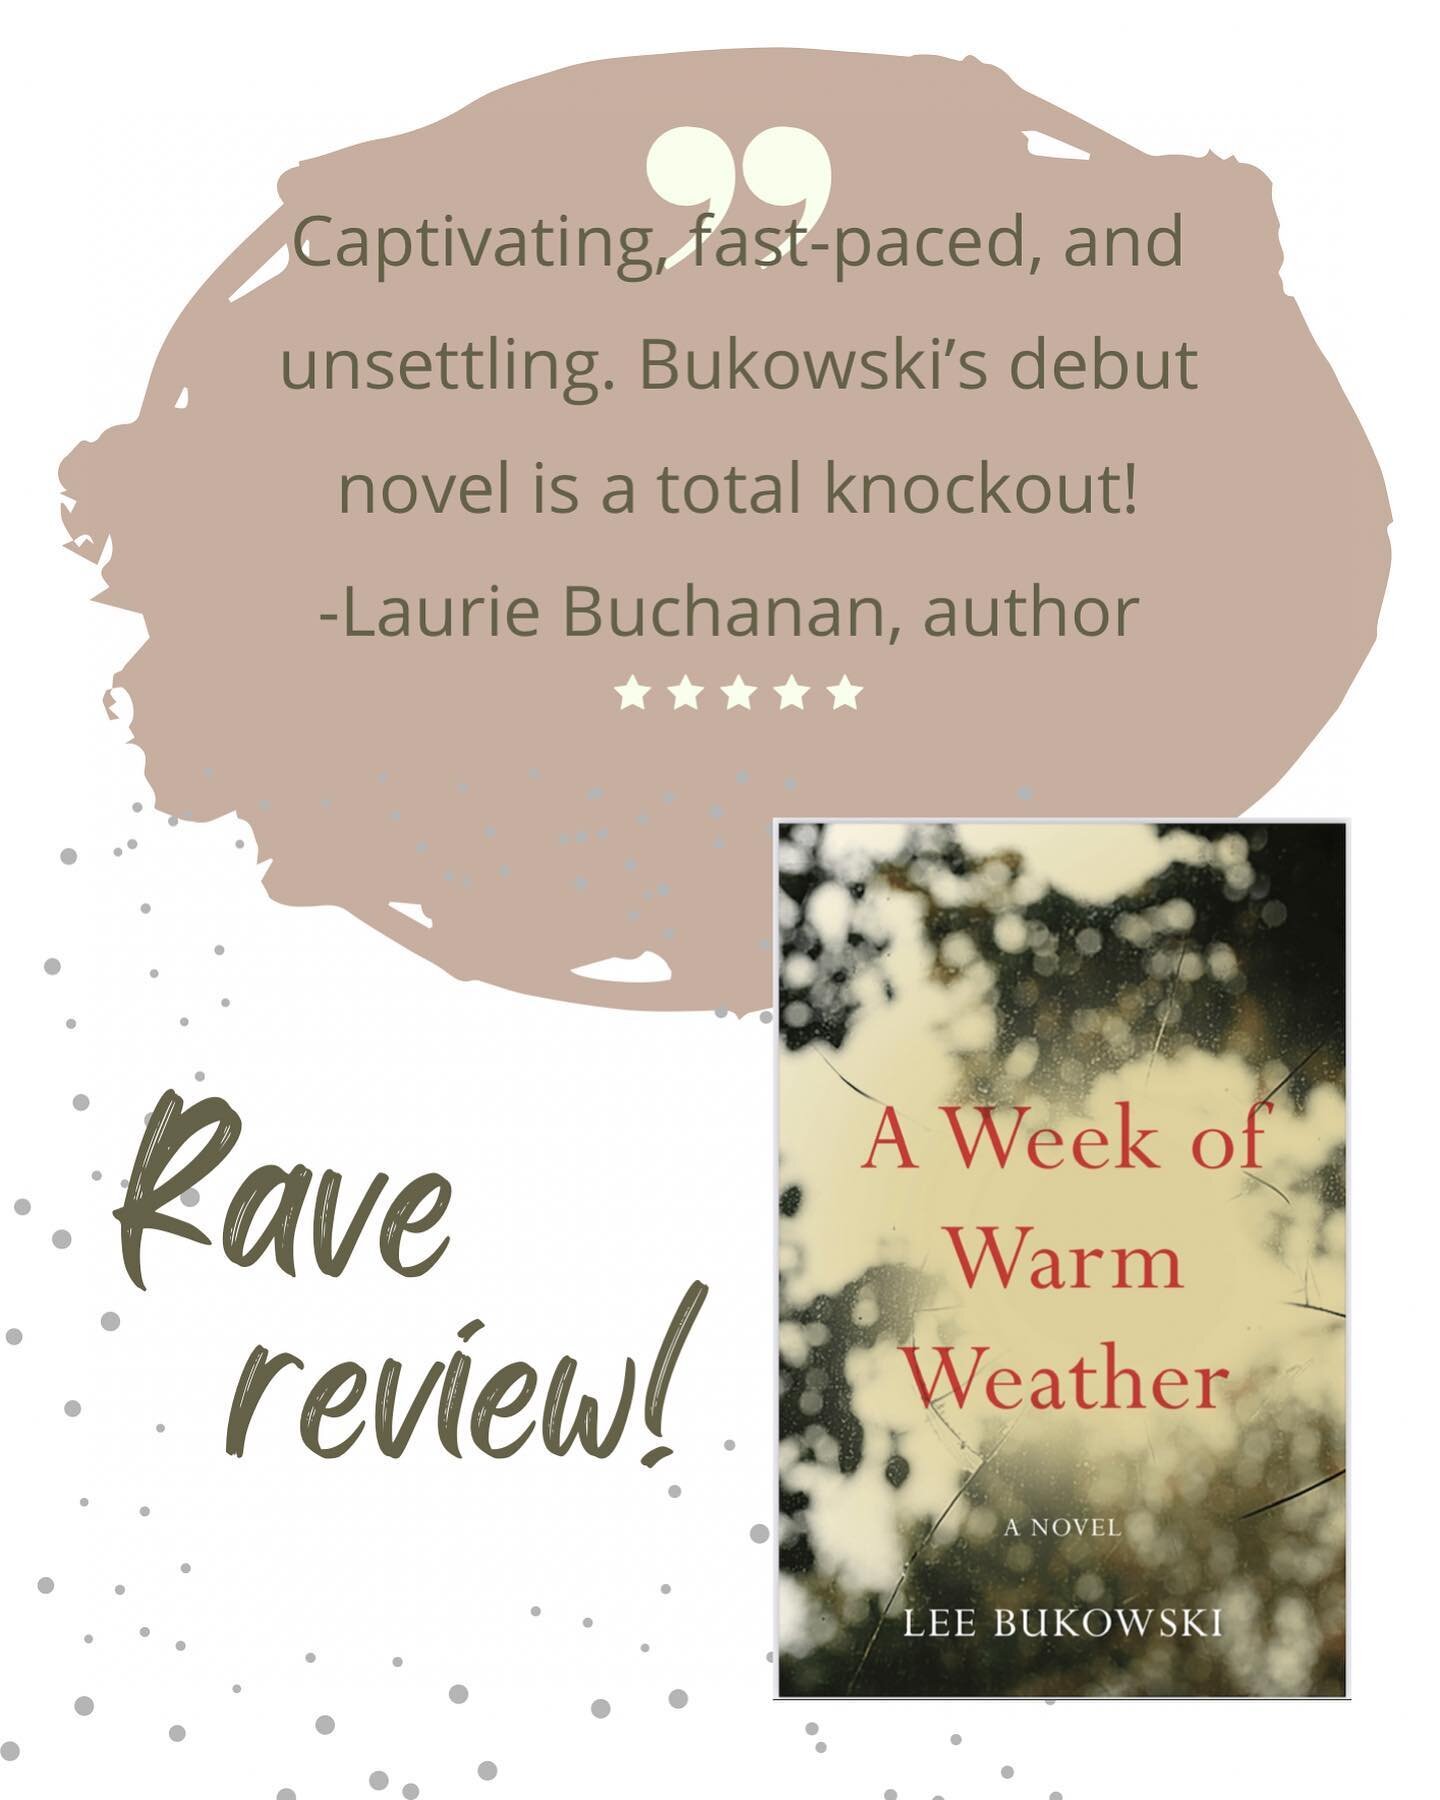 Thank you award winning author @lauriebuchanan.author for this review ❤️
One of the greatest gifts a debut author like me can receive is a positive review! Thank you to all my readers who took the time to post one! It means more than I can say!

Link